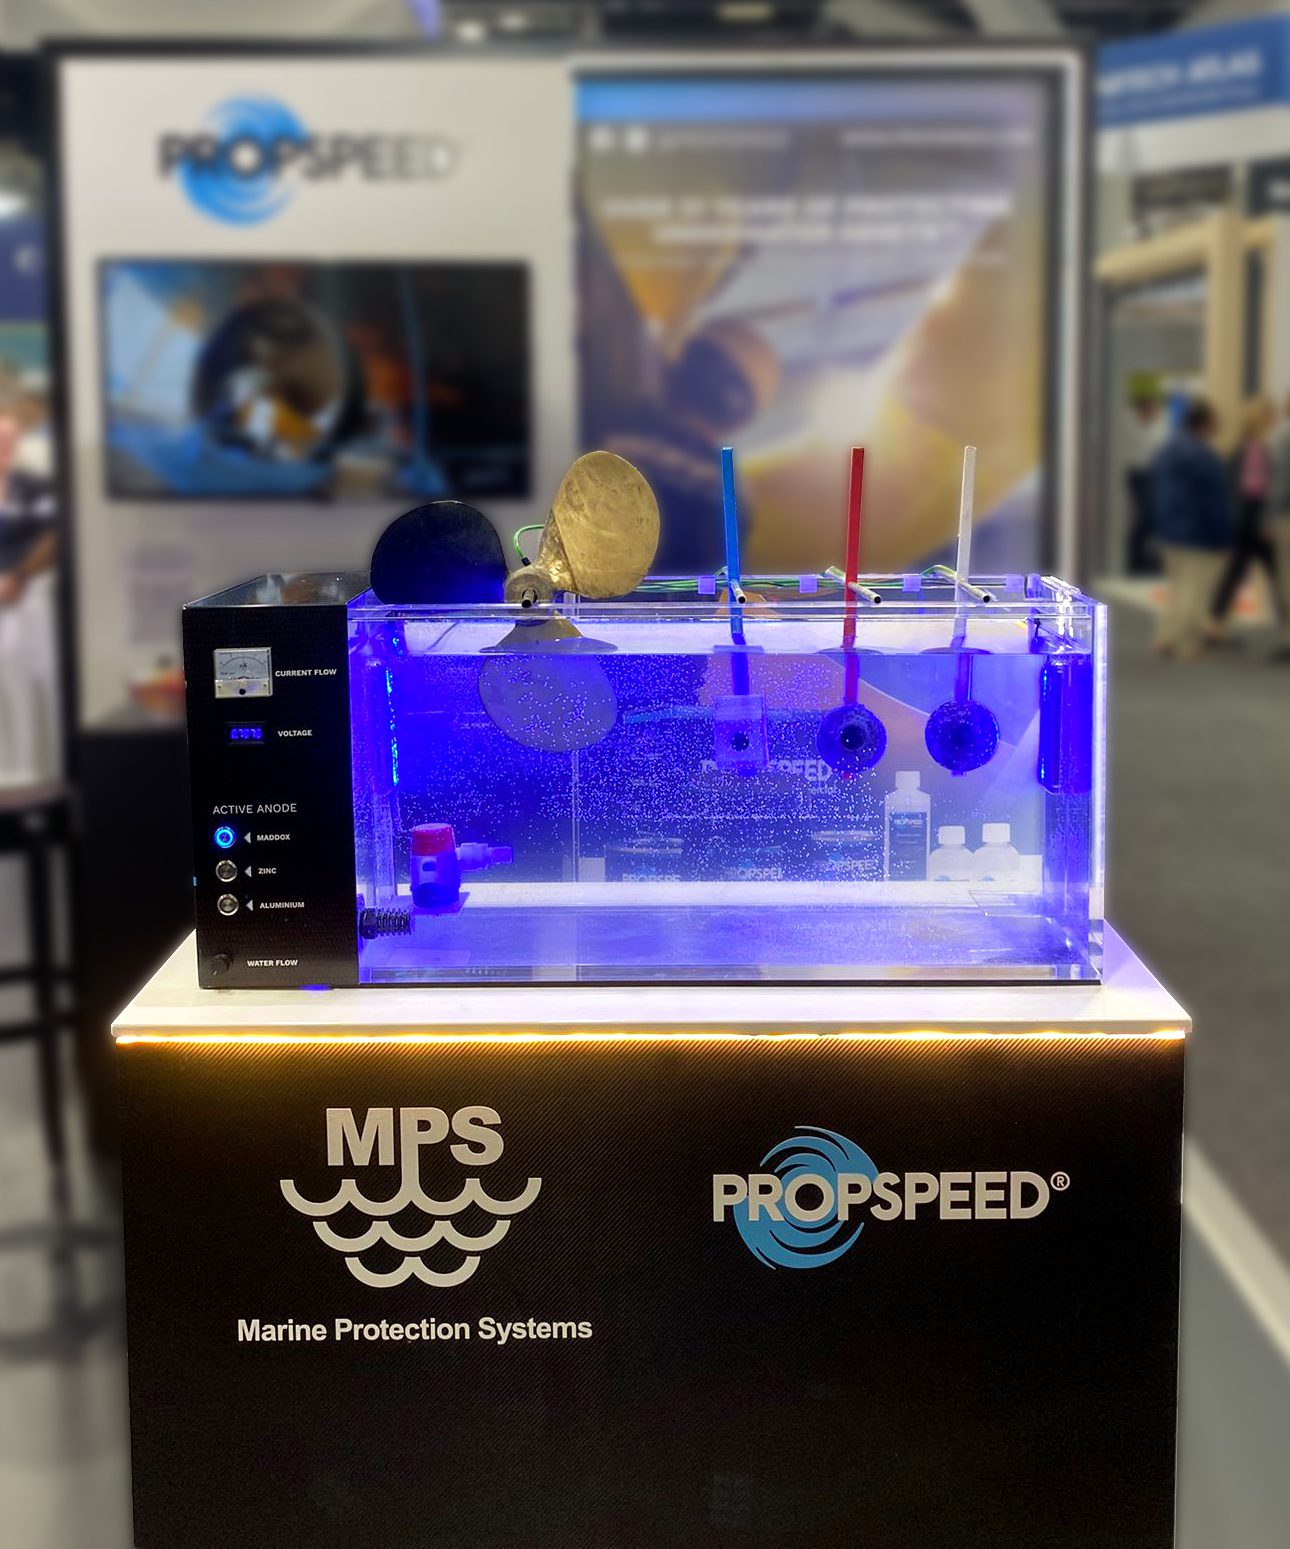 Propspeed & MPS To Educate On Prevention Of Corrosion And Positive Impact On The Marine Environment